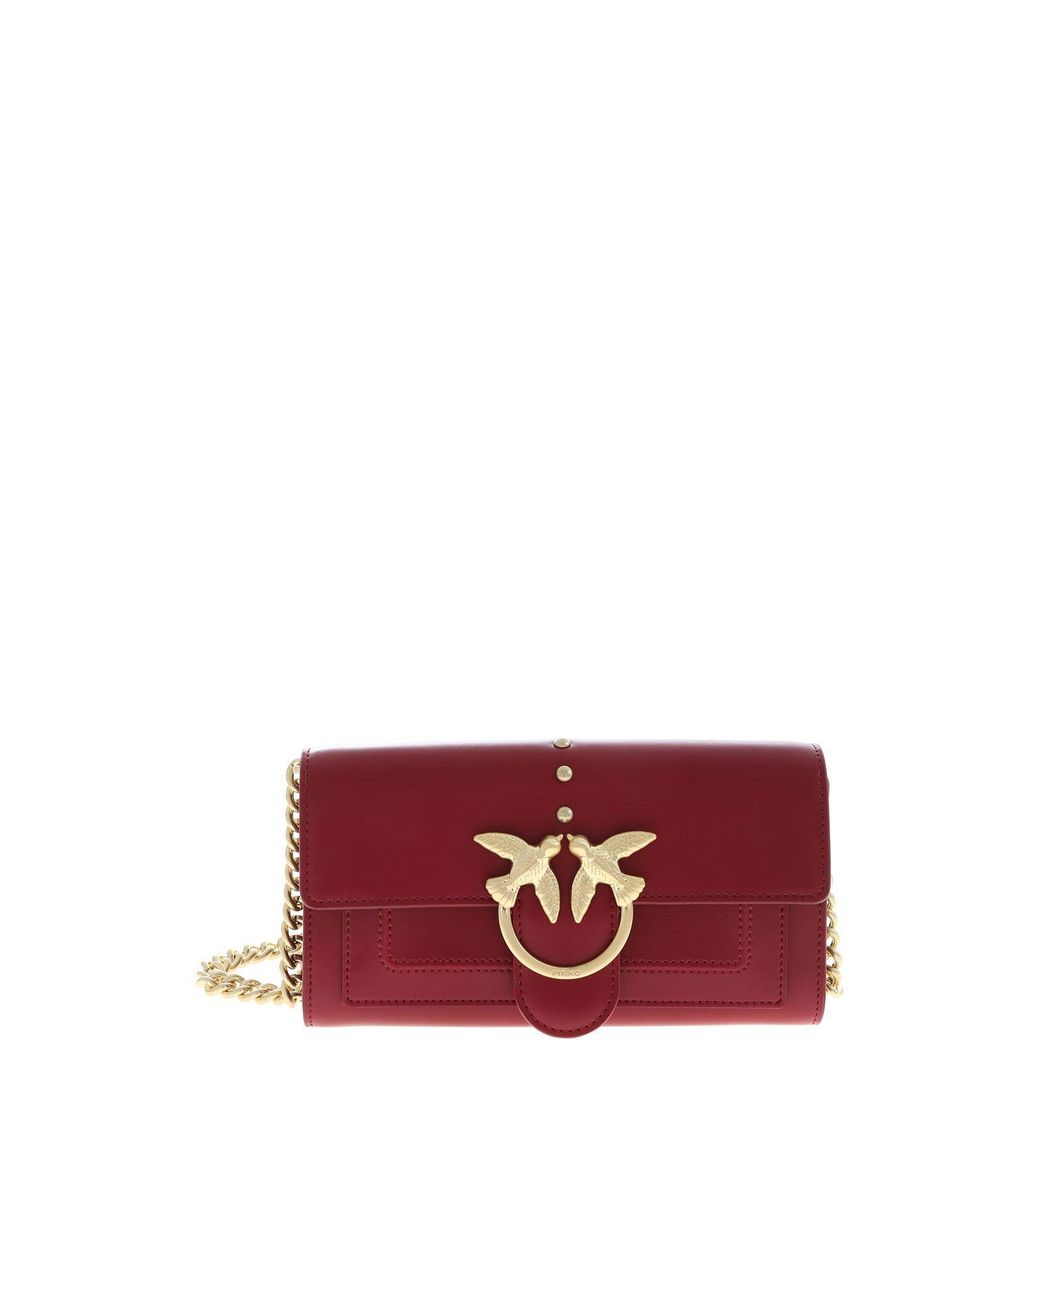 Pinko Leather Wallet With Burgundy Houston Shoulder Strap in Purple - Lyst